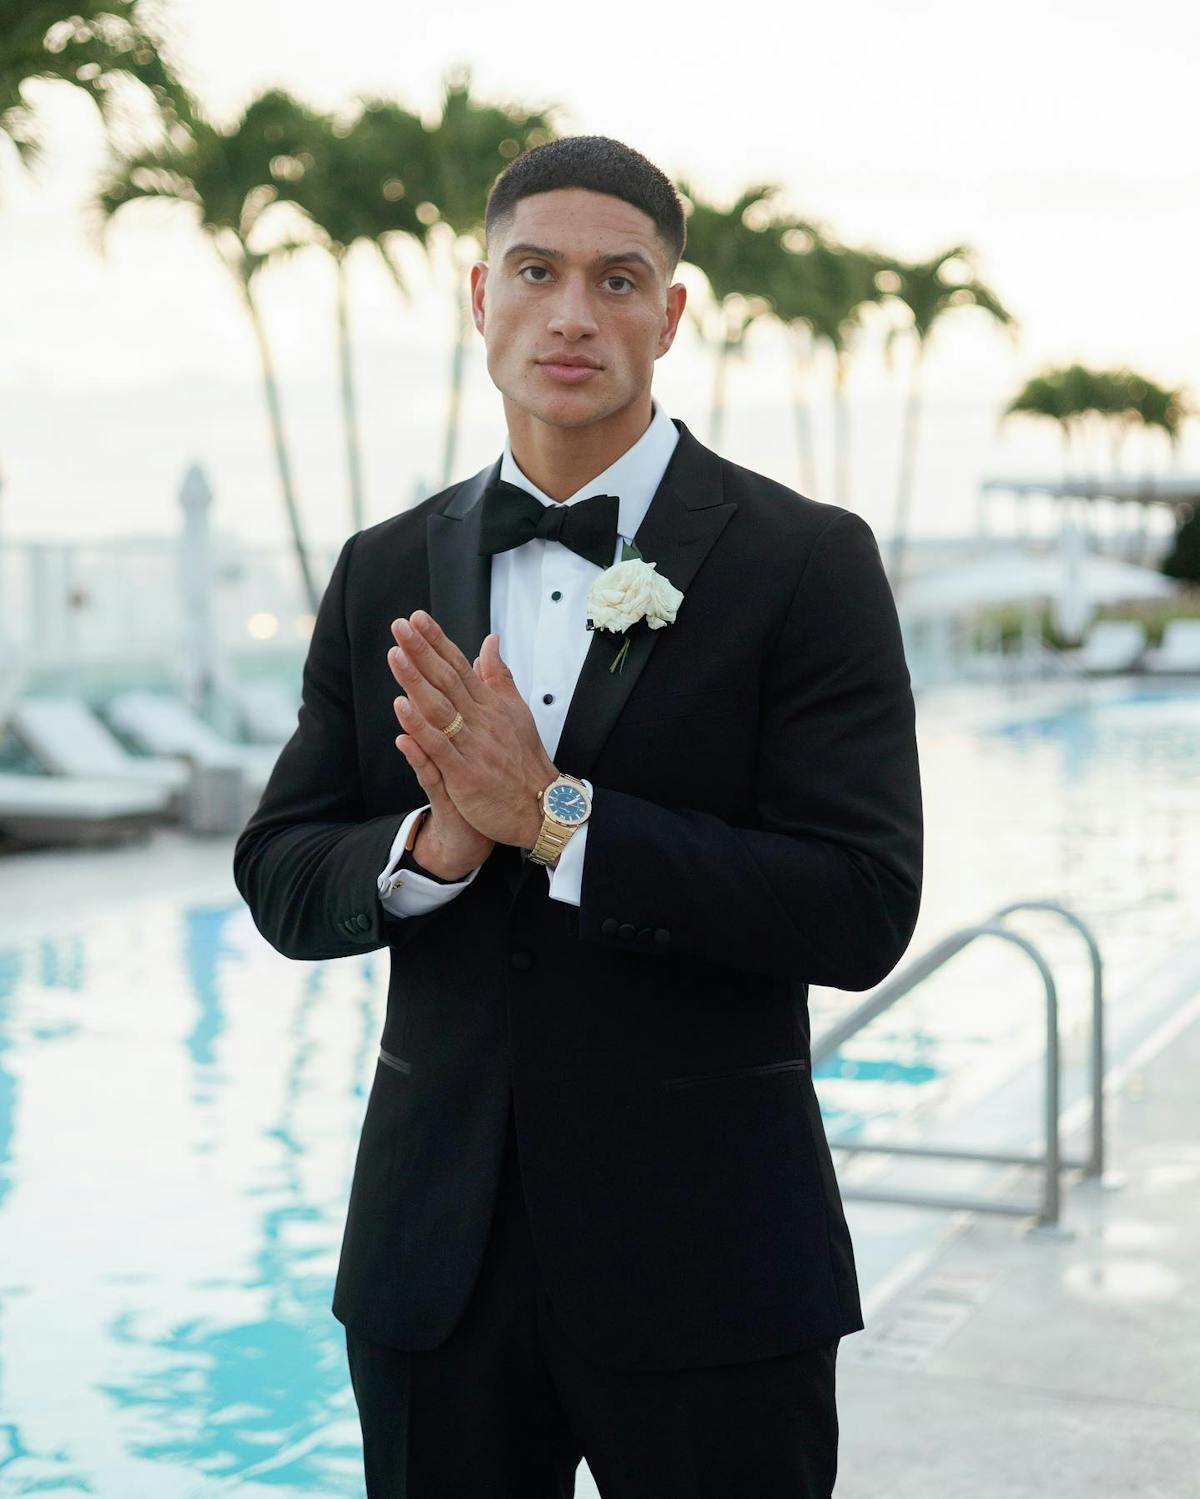 Man wearing summer black tie wedding style in a black tuxedo, metallic men's jewelry, and a white boutonnière by the pool with palm trees.